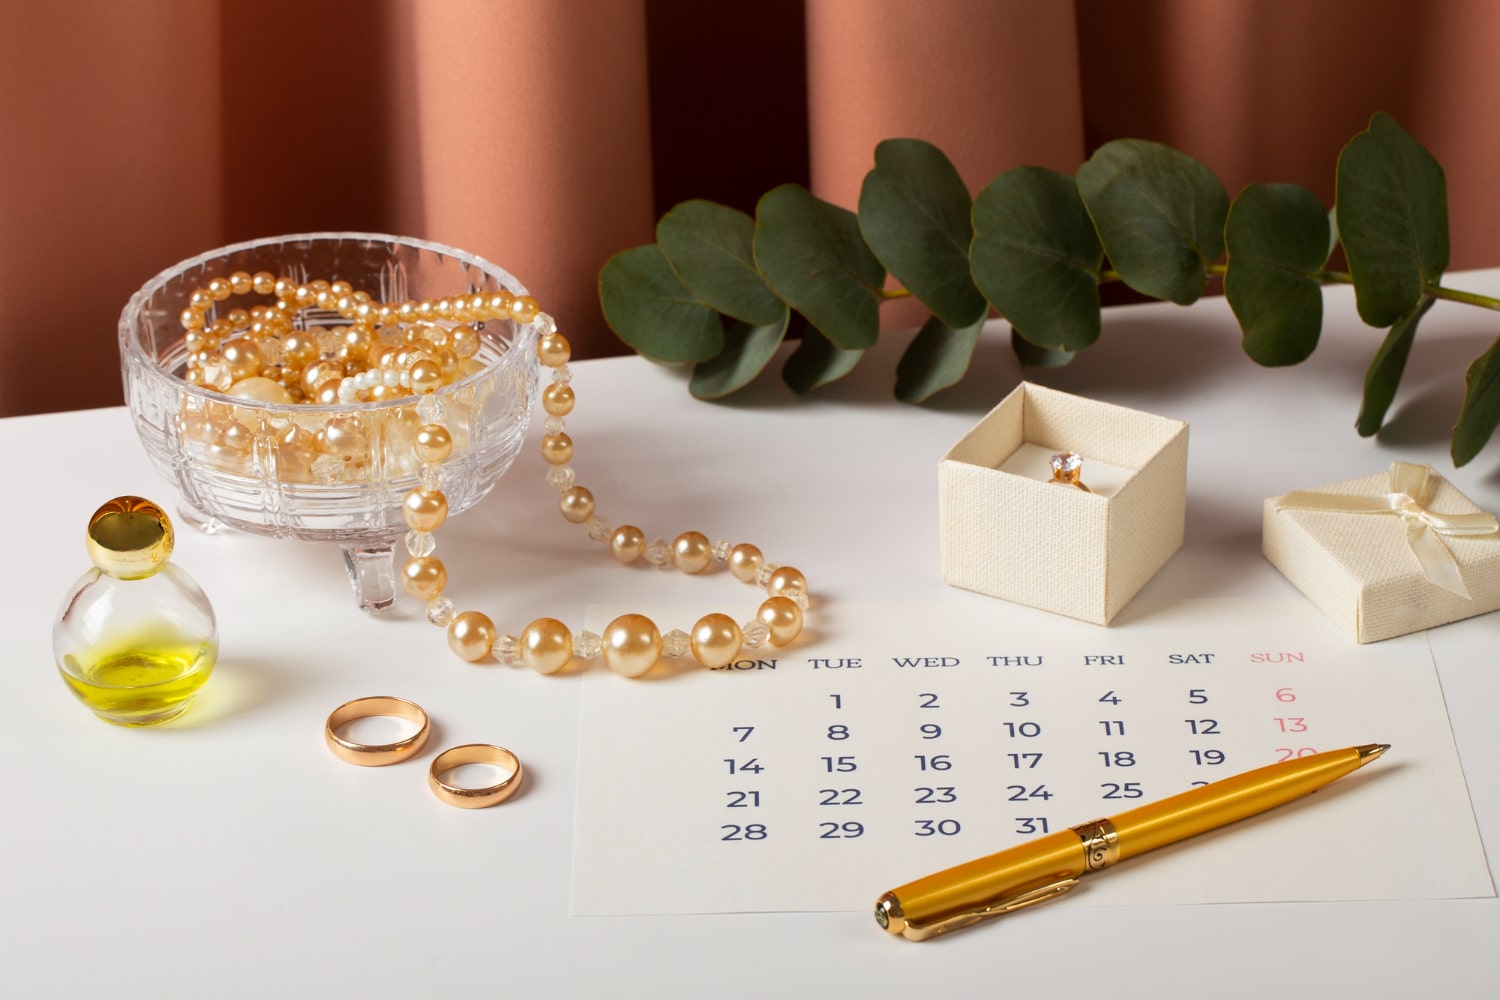 Elegant wedding gift setting with rings and calendar for anniversary.